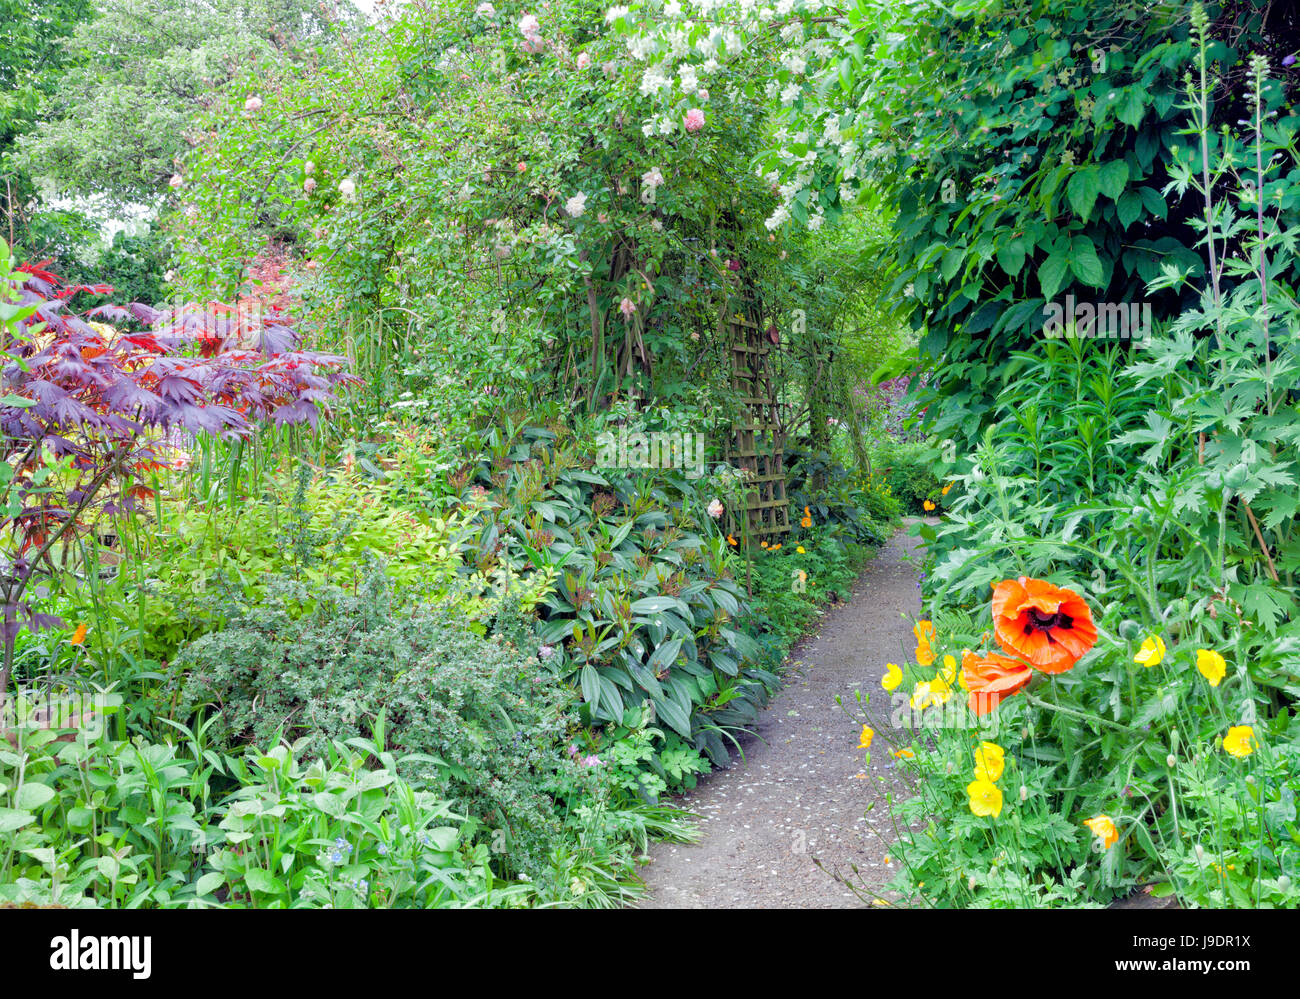 Colorful summer cottage garden with a stone path through roses, flowers, shrubs and trees . Stock Photo